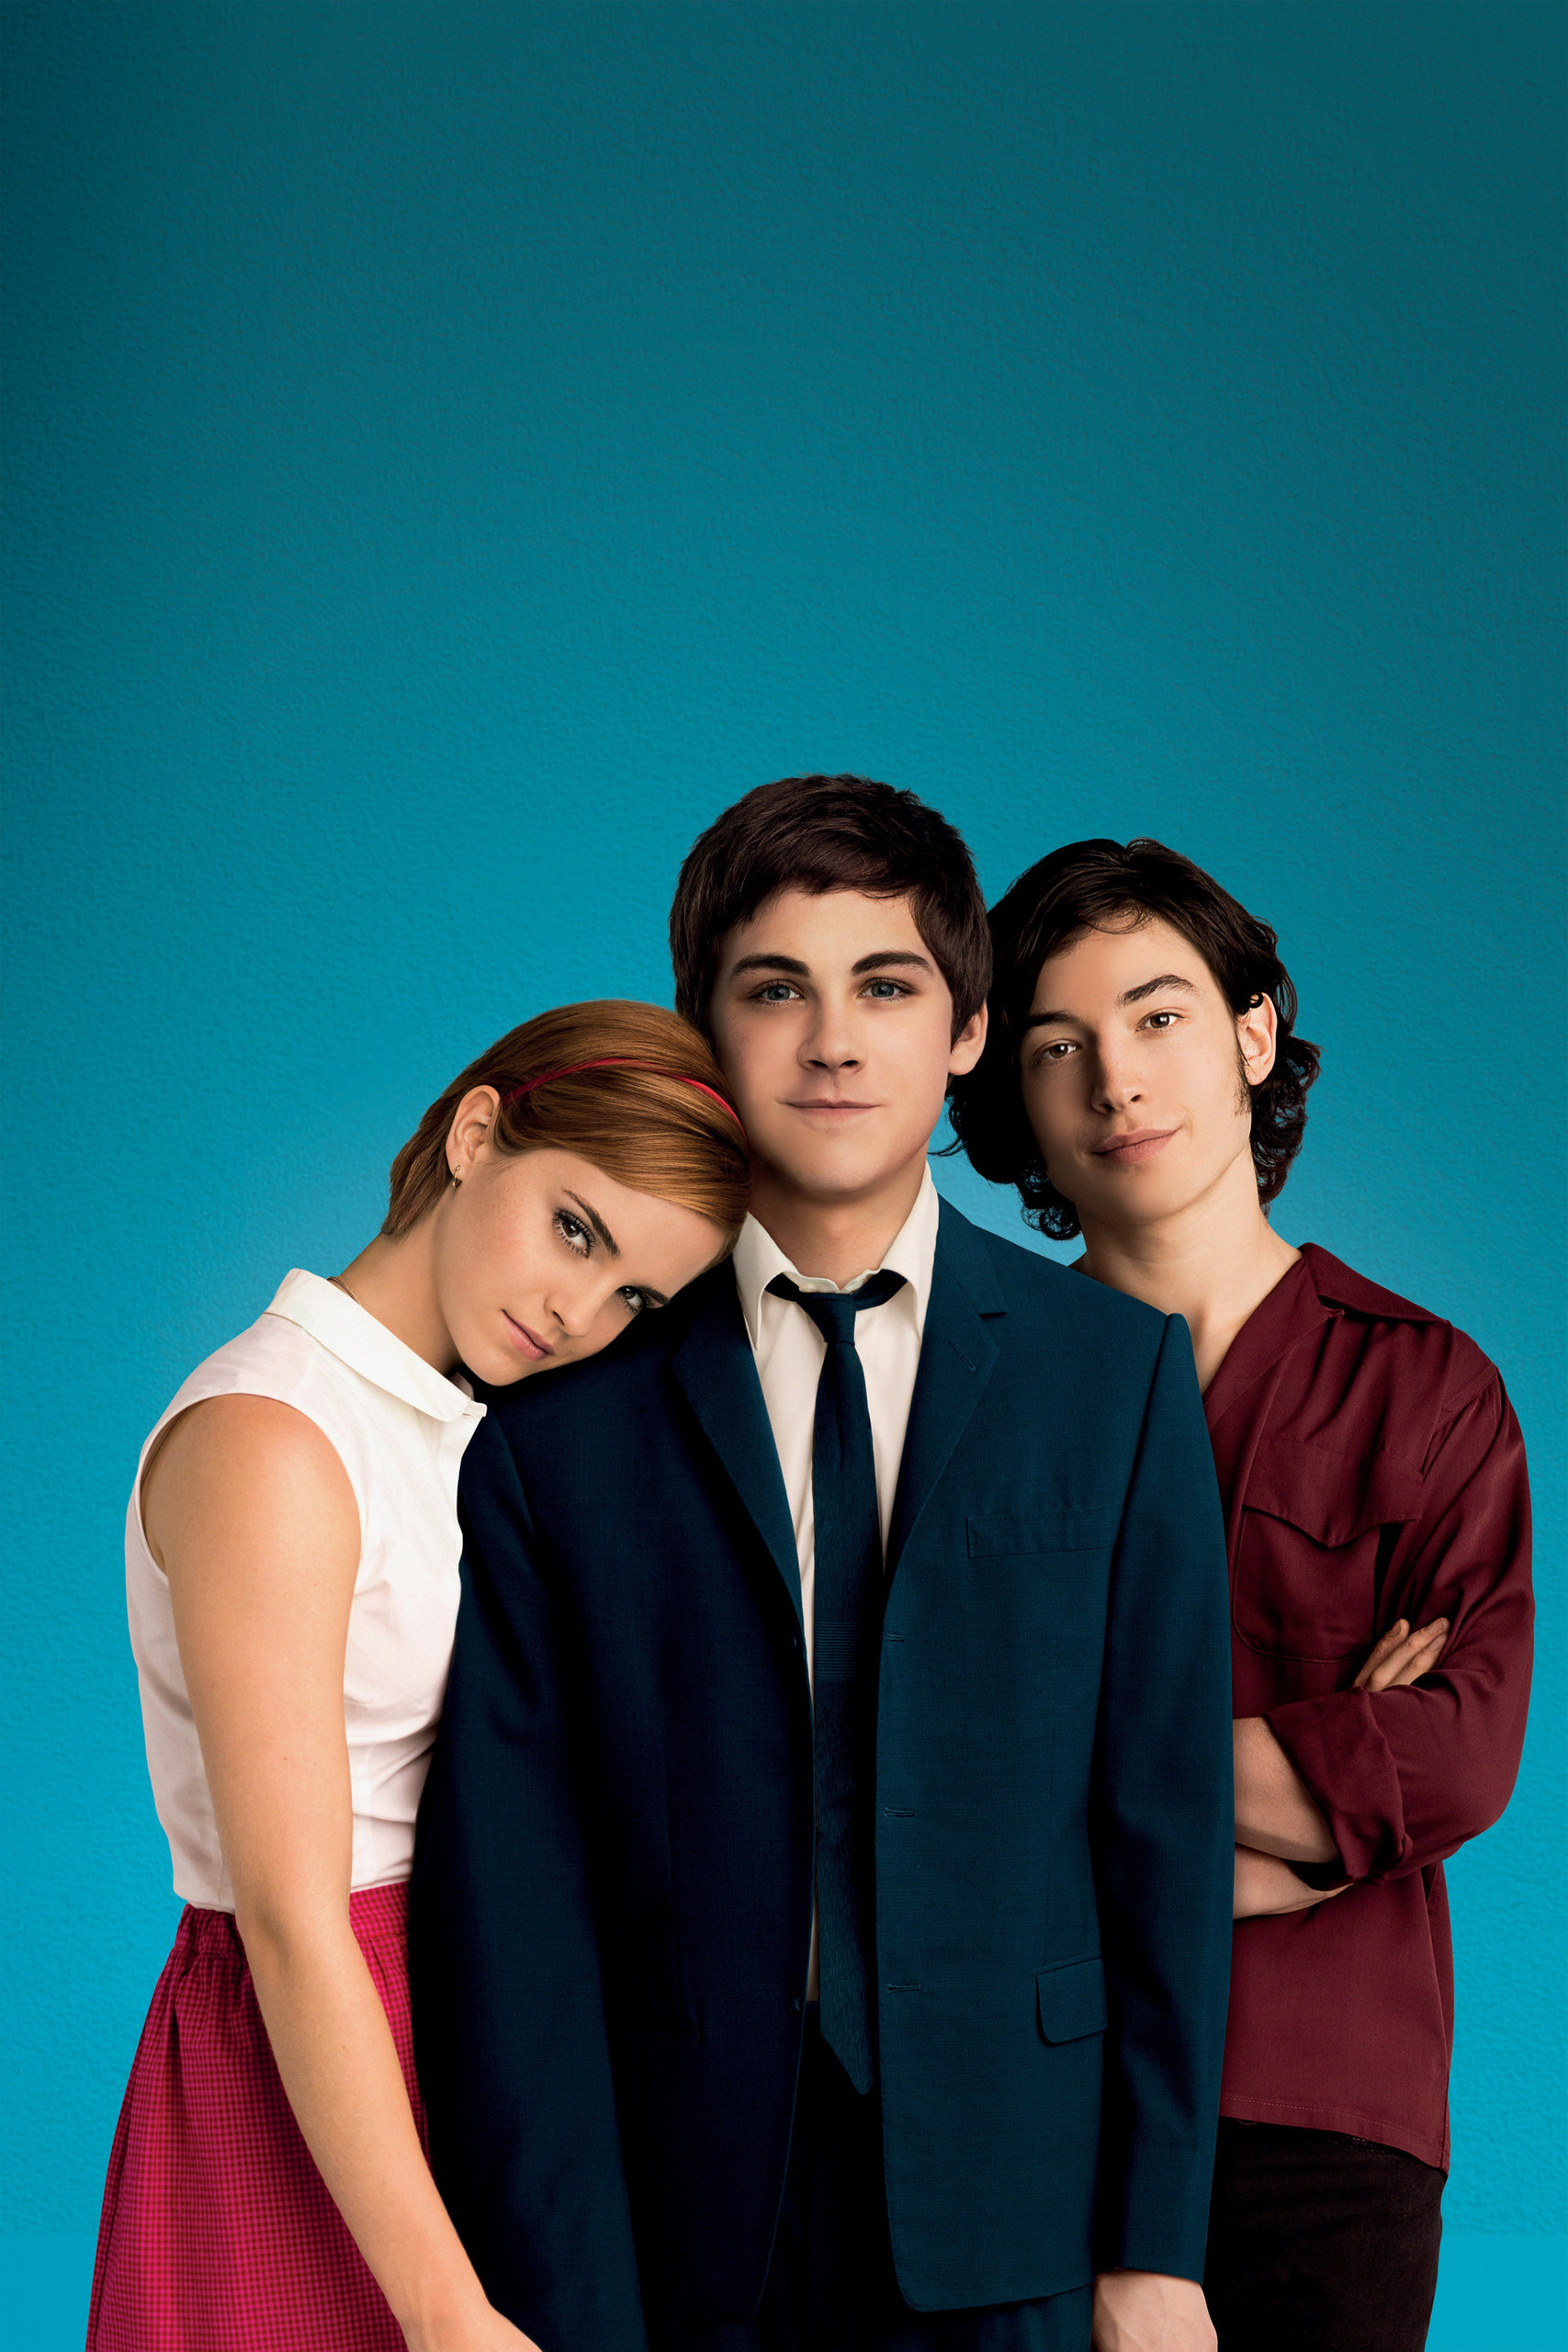 Perks of Being a Wallflower, HQ wallpapers, Movie stills, 4K wallpapers, 1710x2560 HD Phone